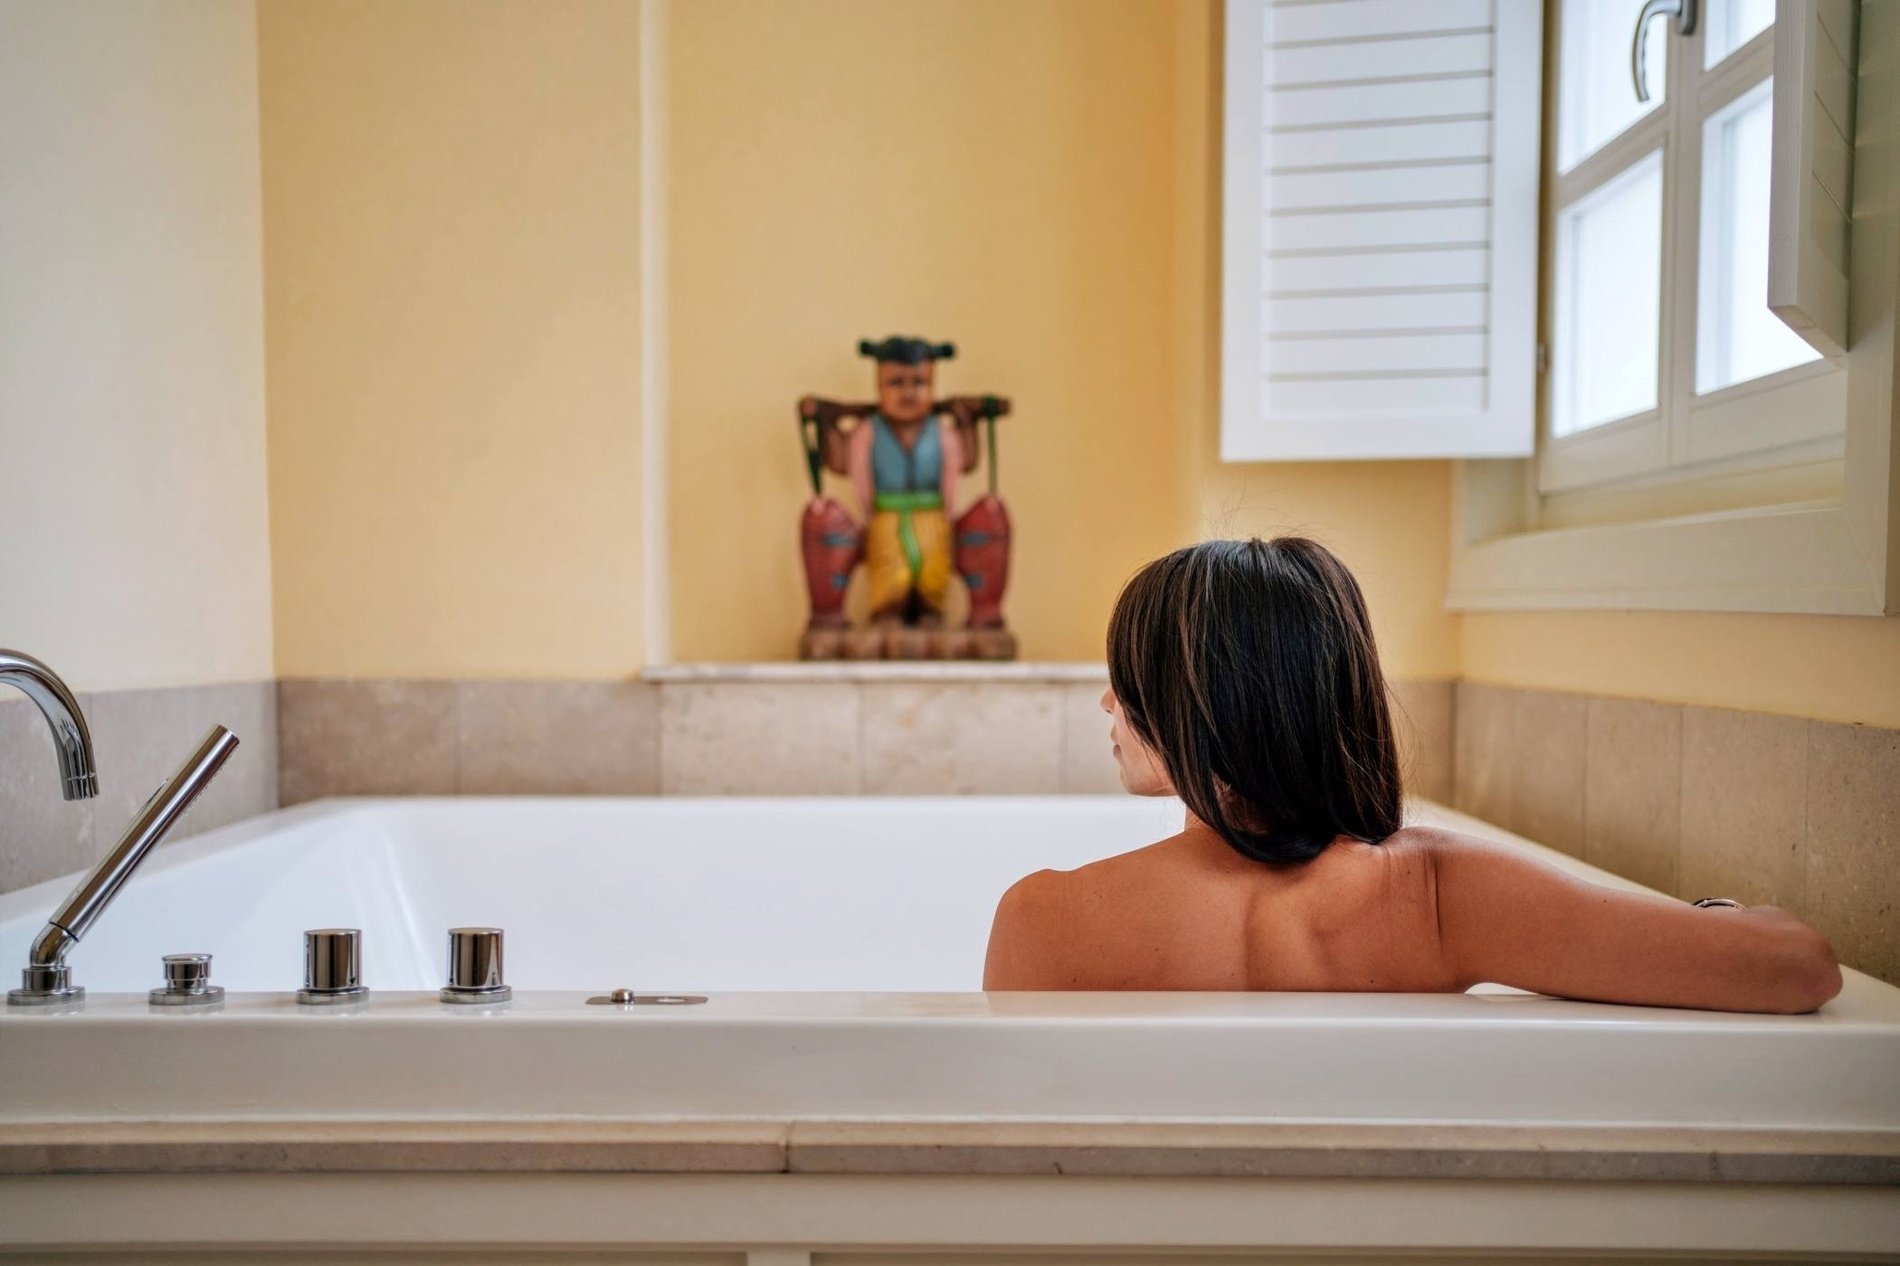 a woman in a bathtub with a statue in the background